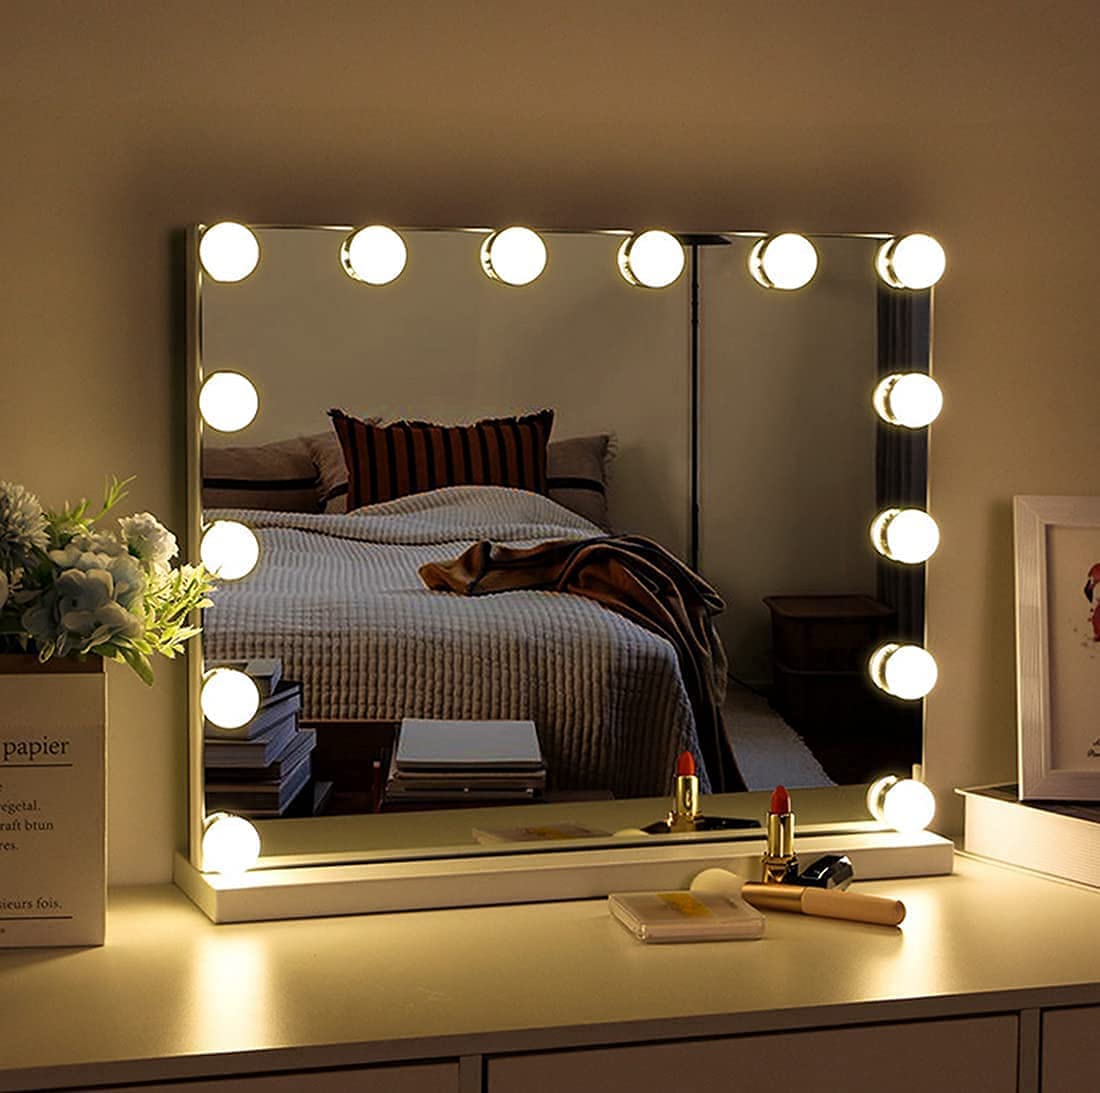 Hollywood Vanity Style LED Makeup Lights Mirror with 3 Color Modes Lights with 10 Dimmable Bulbs (Mirror Not Include) Deals499